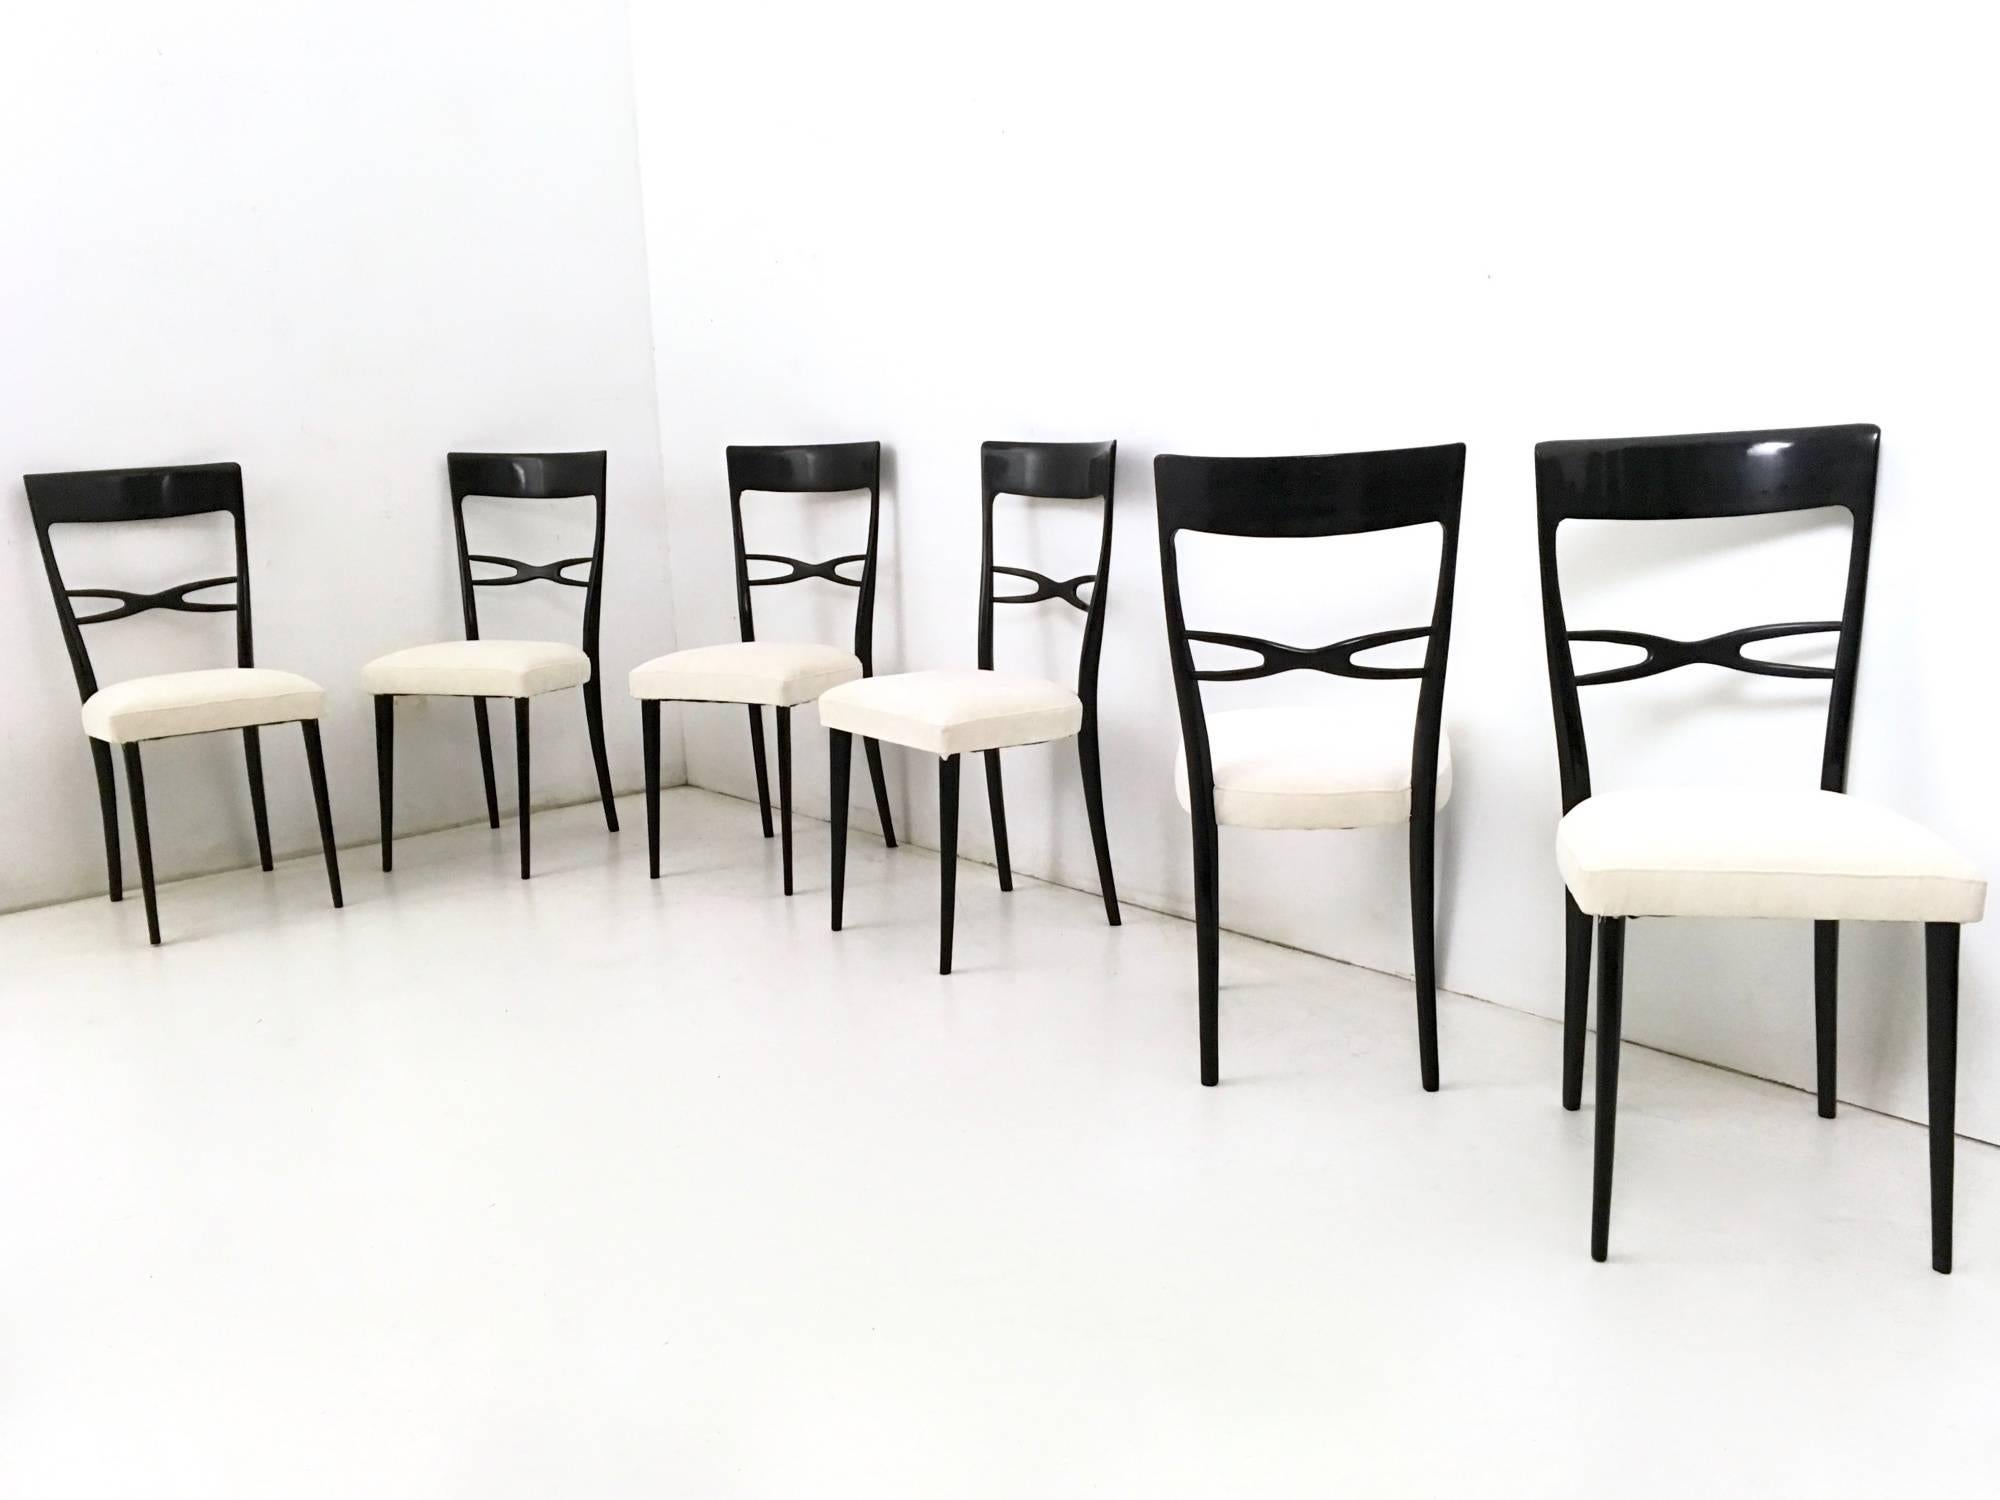 Made in ebonized wood and padding upholstered in light ivory fabric. 
They have been reupholstered and relacquered, therefore they are in perfect condition.

Measures: 
Width: 42 cm
Depth: 48 cm 
Height: 95 cm.